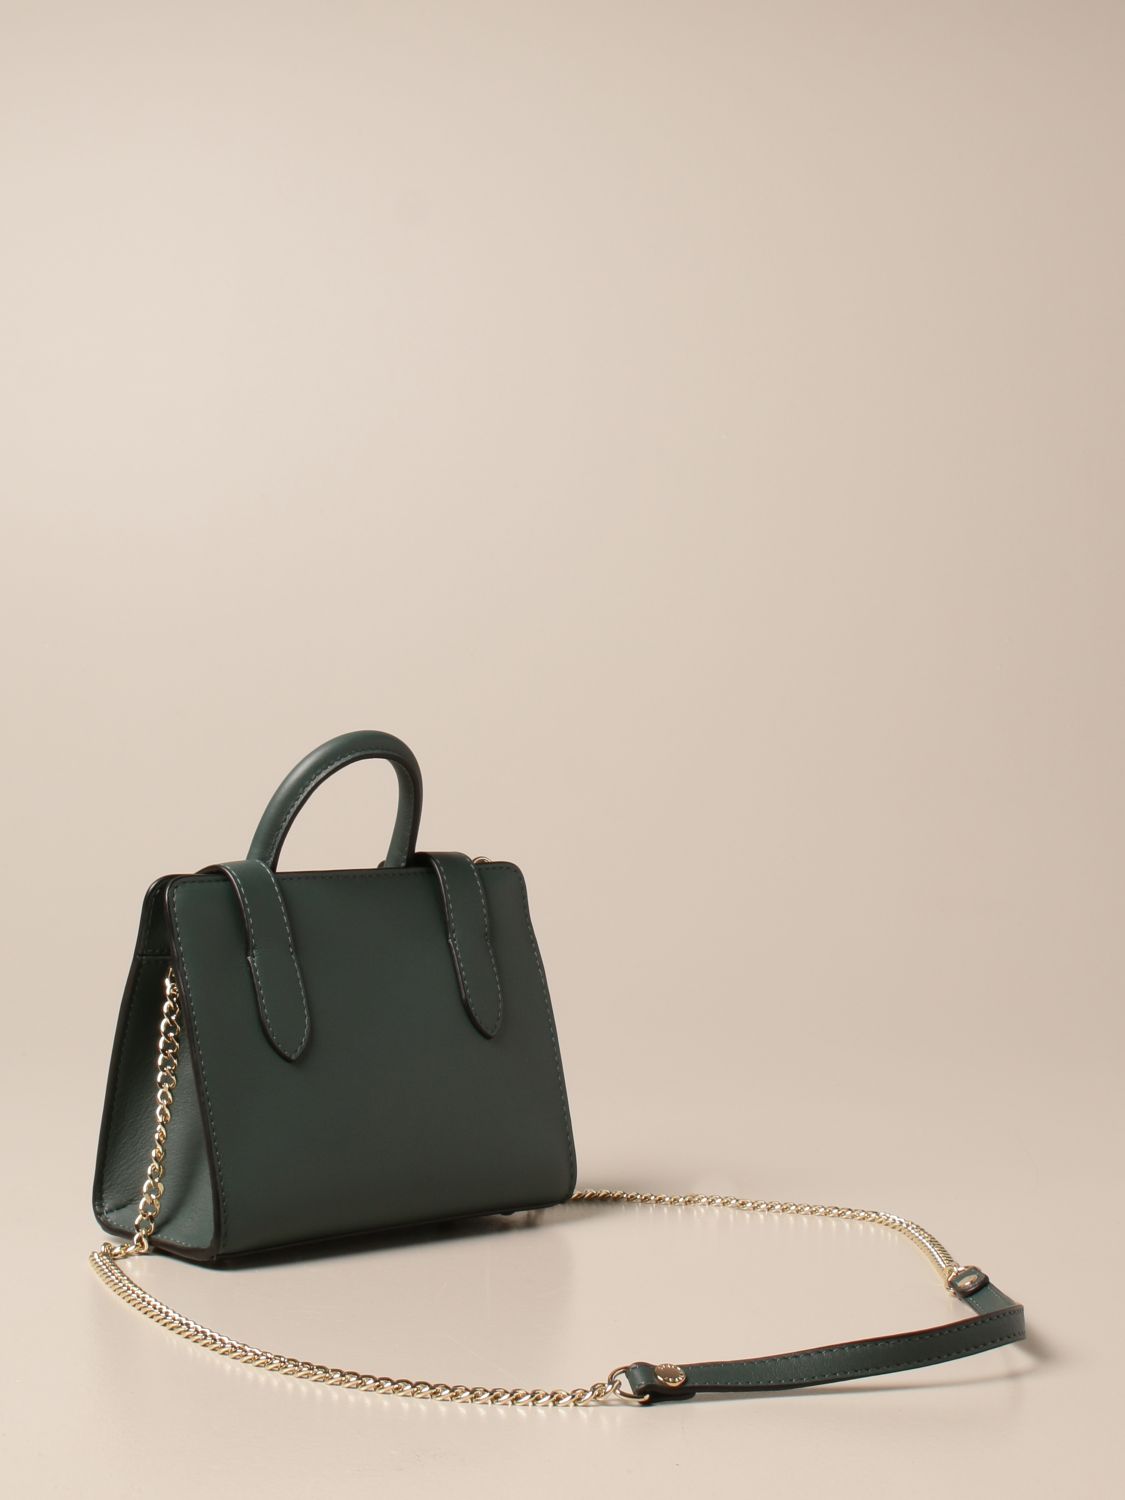 Strathberry Limited The Strathberry Nano Tote - Sage 495.00